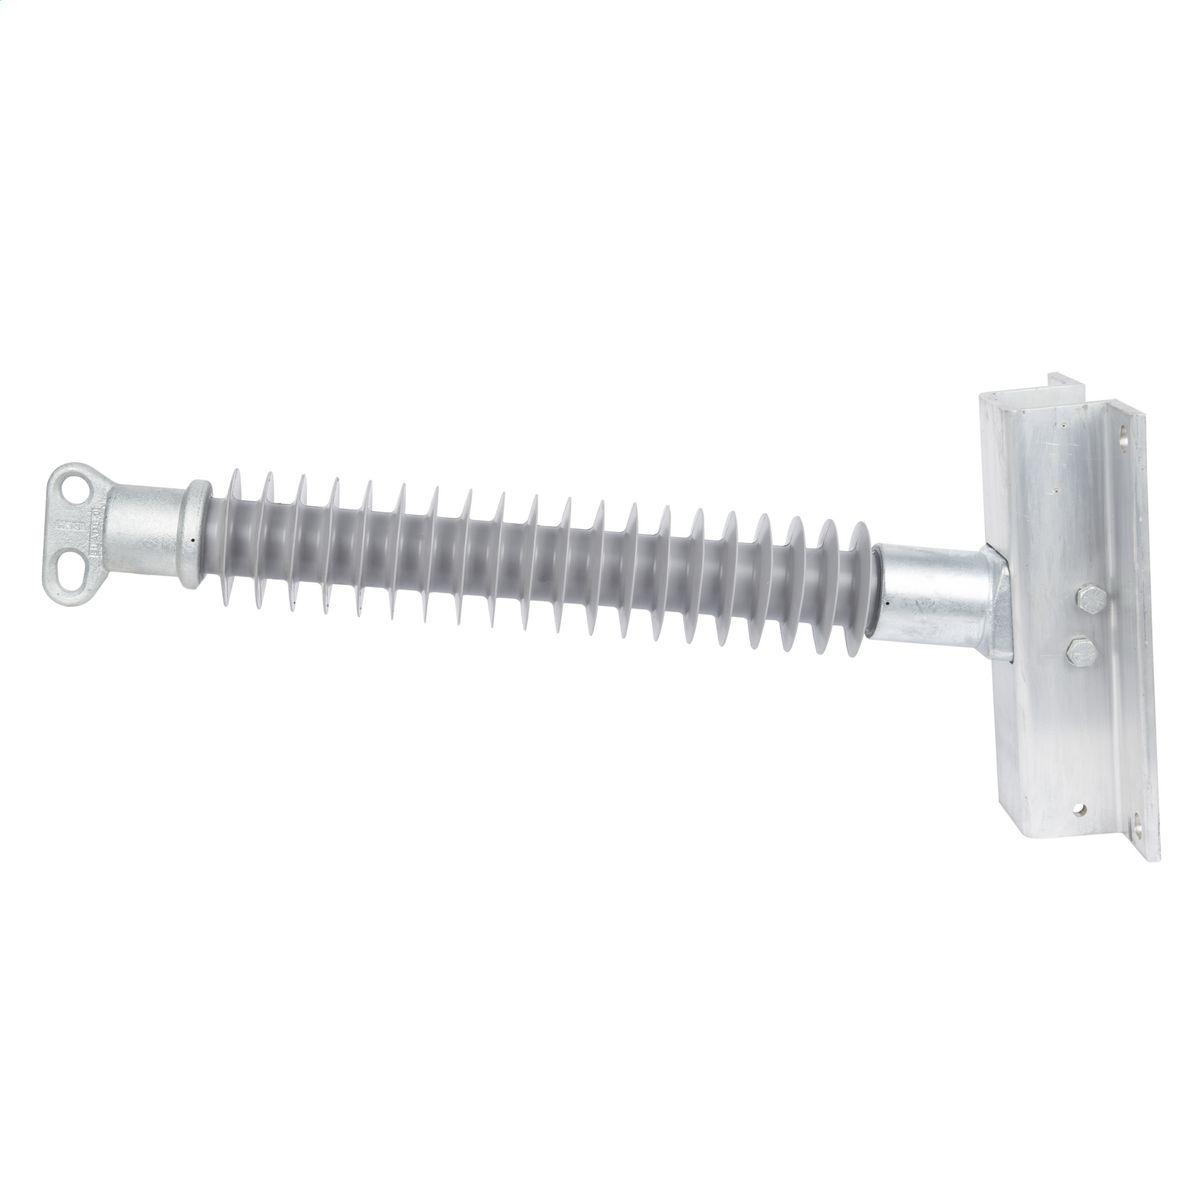 Hubbell P350161S0030 3.5" Line Post, 2 hole blade,Aluminum  flat base 9x13 - 7/8" bolts  ; Made from hydrophobic silicone polymer ; 